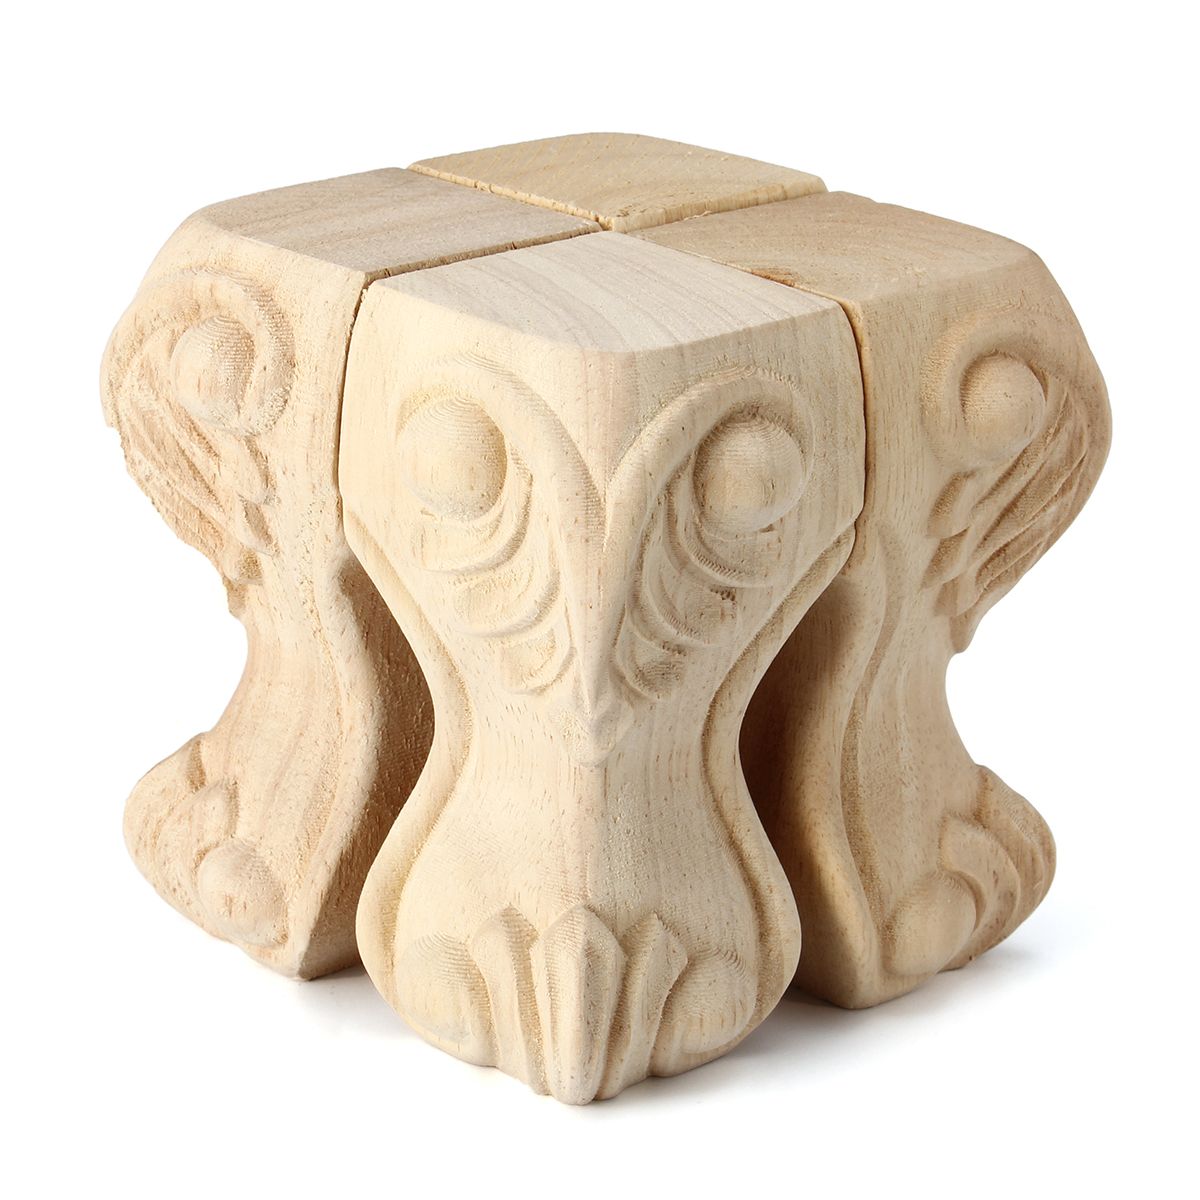 4Pcs-1015cm-European-Solid-Wood-Carving-Furniture-Foot-Legs-Unpainted-Table-Cabinet-Feets-1322663